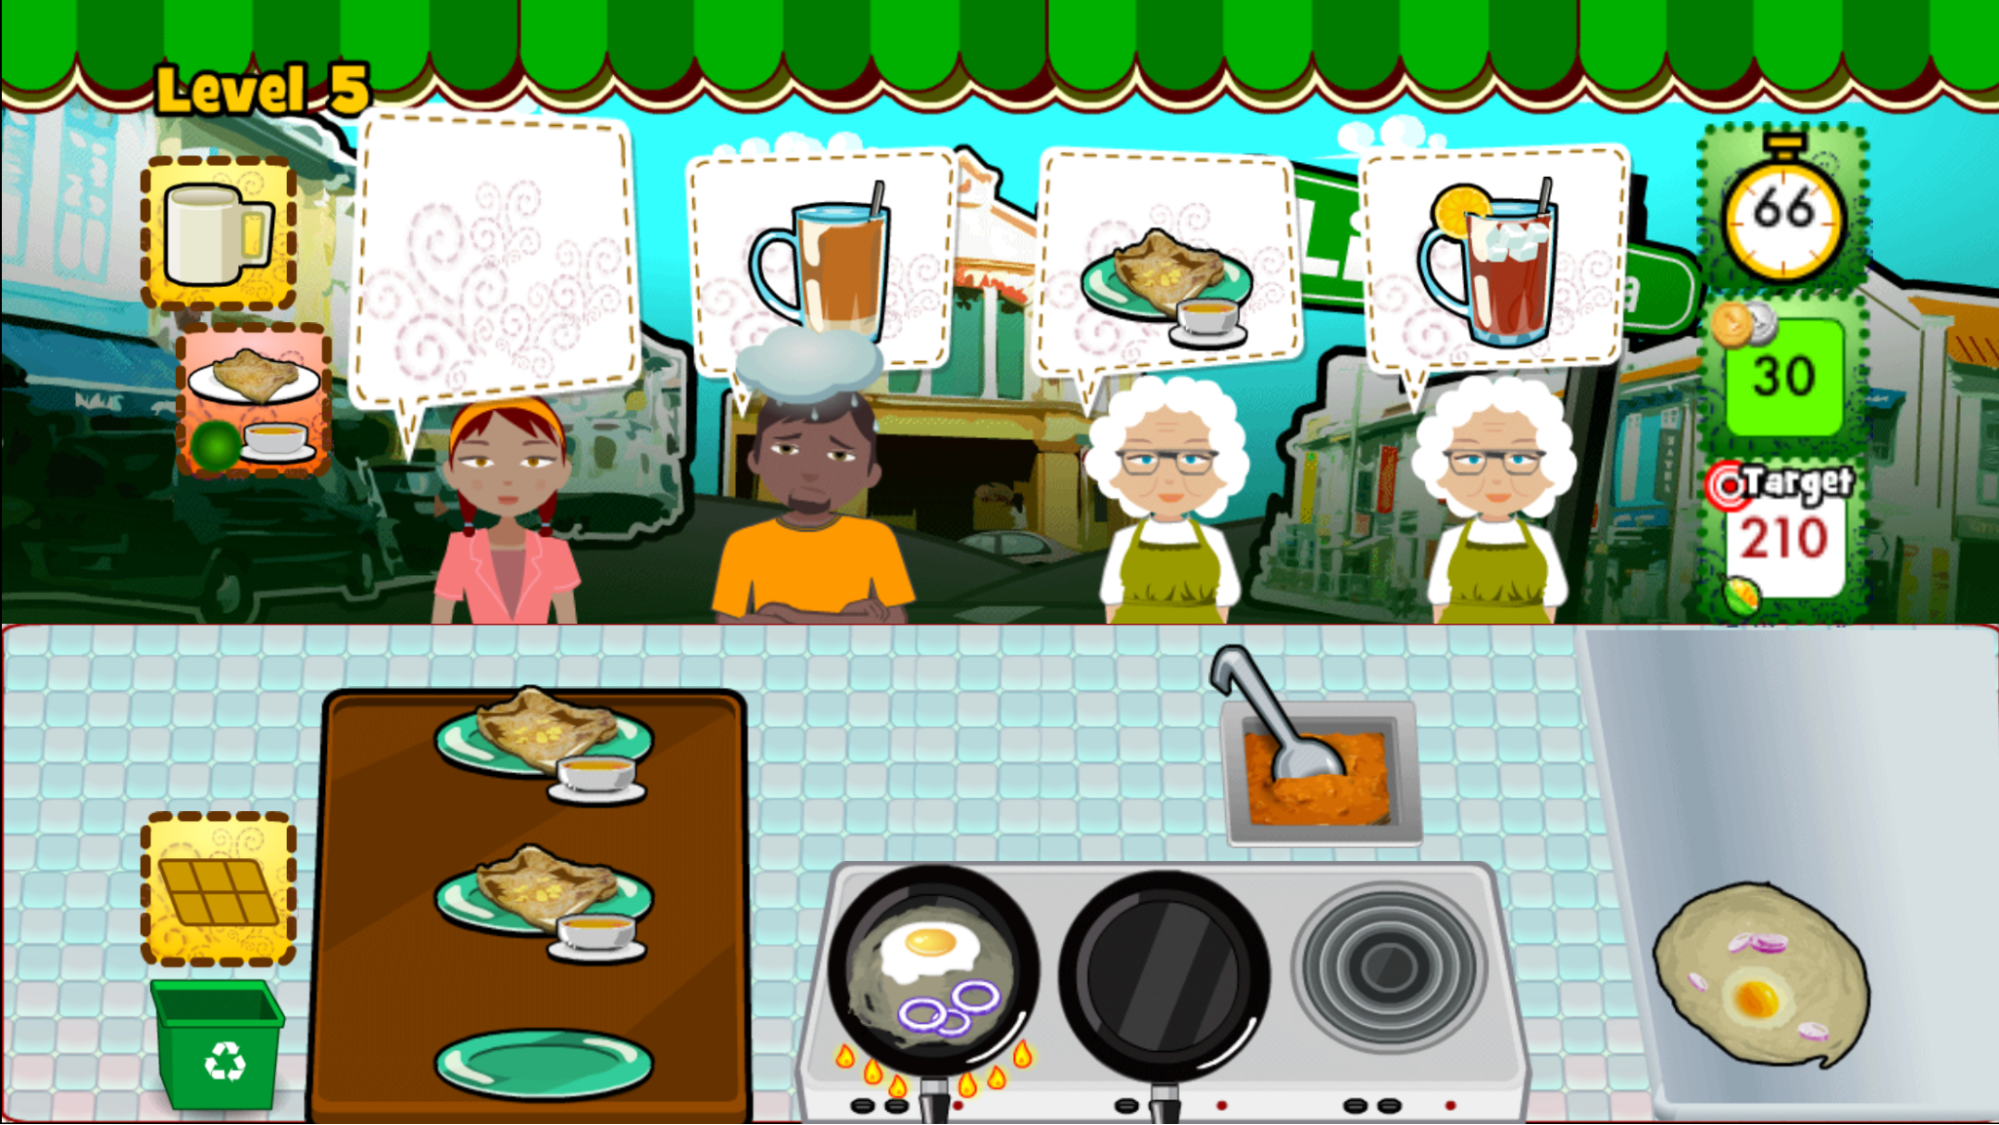 7 Cooking Games ideas  free cooking games, cooking games, recipes